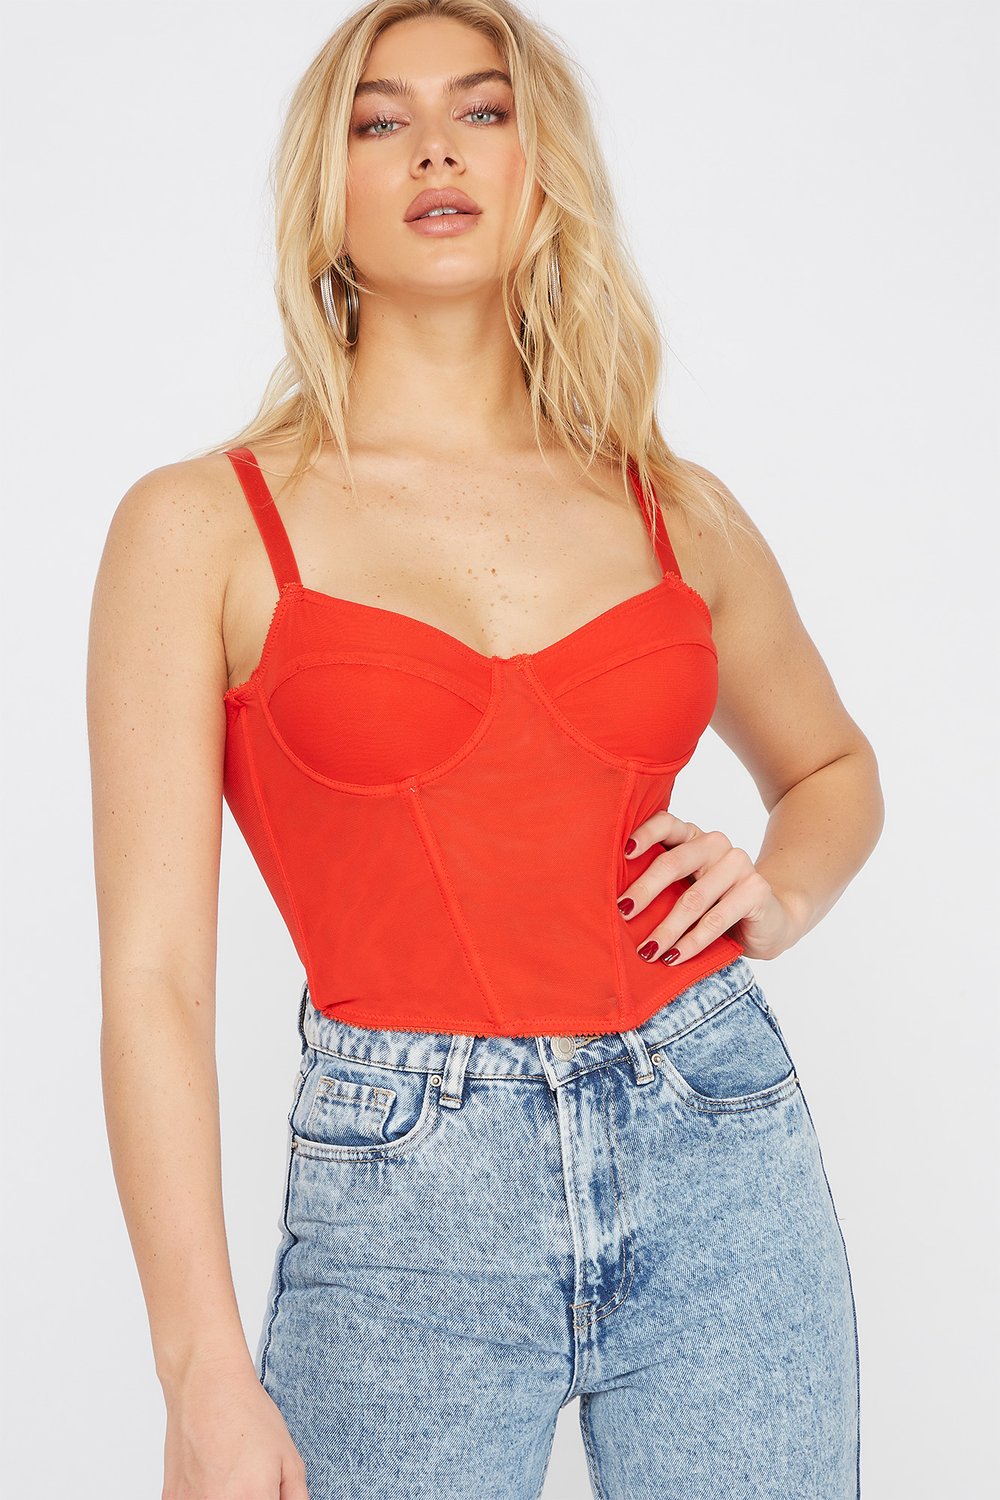 Charlotte Russe After Christmas 2022 Sales, Ads, & Deals – 40% OFF